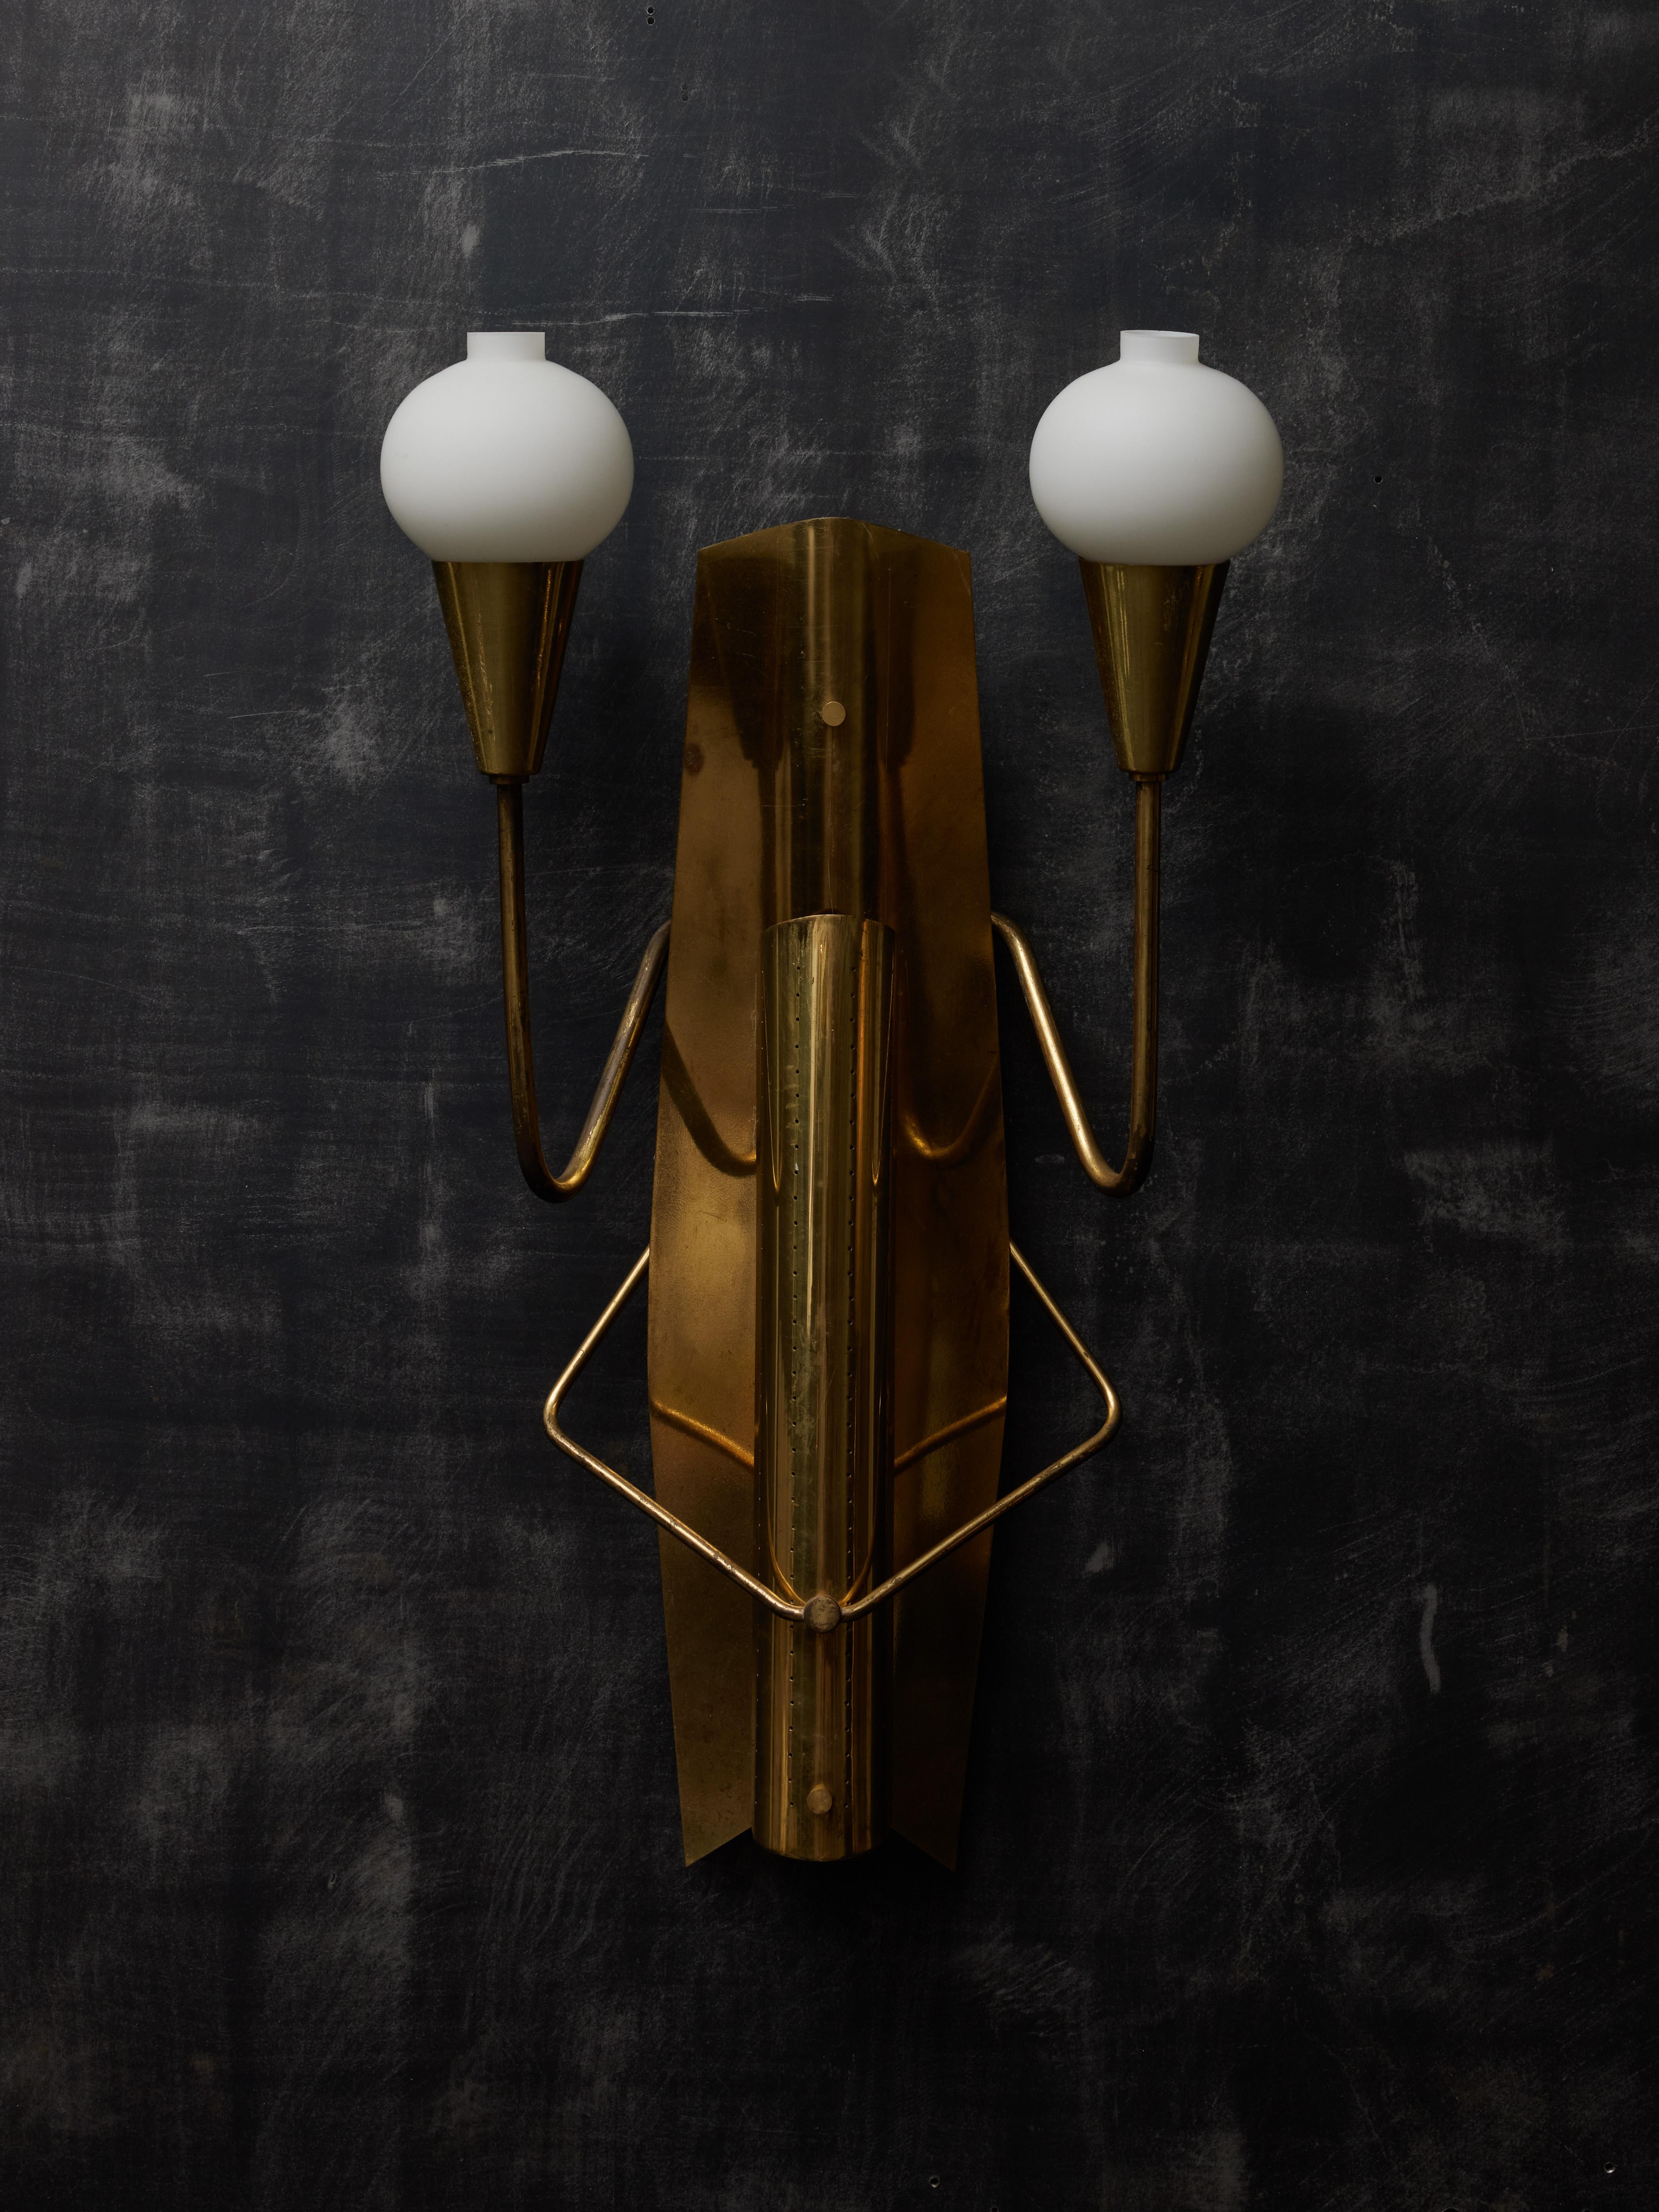 Pair of vintage brass and opaline glass globes wall sconces, which shape reminds us of a grasshopper. These sconces were hung since 1954 in a movie theatre in Norway.

